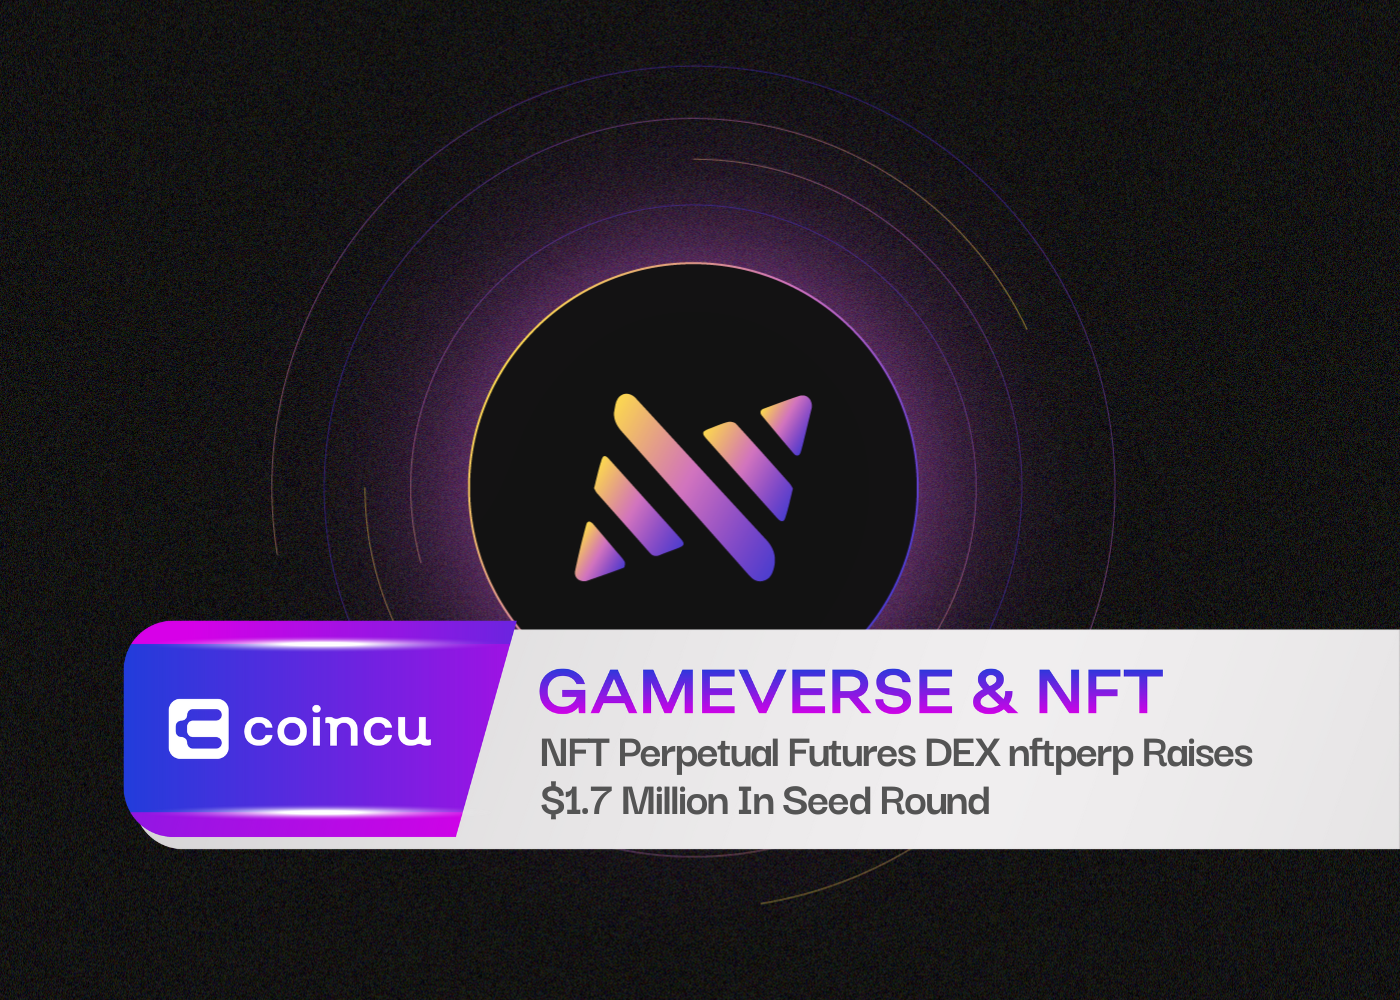 NFT Perpetual Futures DEX nftperp Raises $1.7 Million In Seed Round